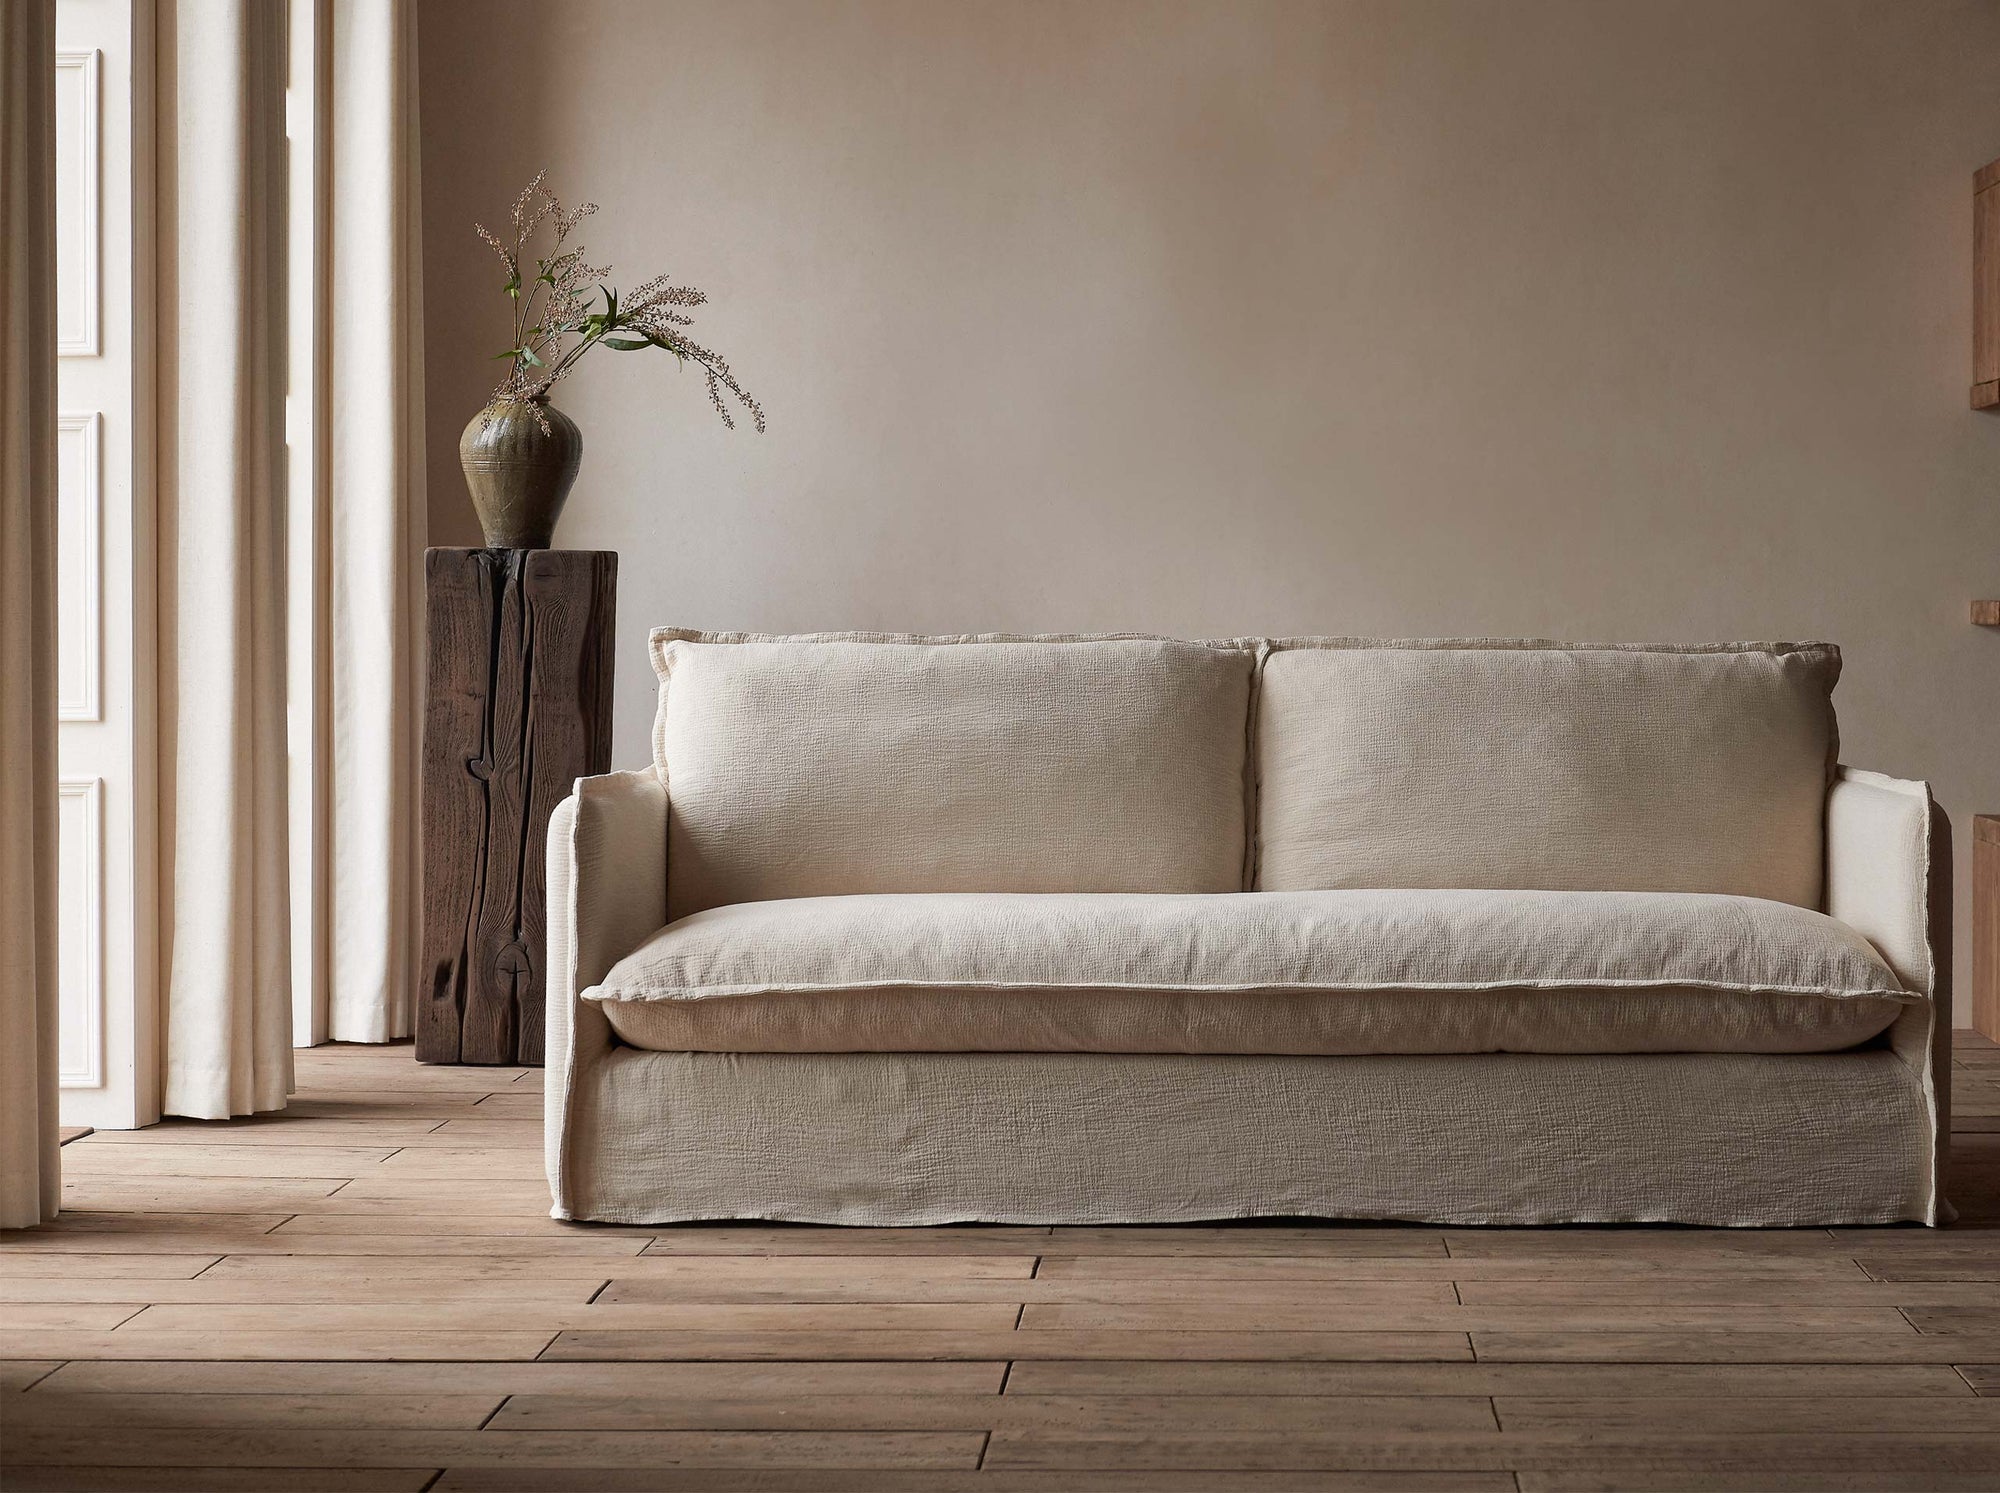 Neva 84" Sofa in Corn Silk, a light beige Washed Cotton Linen, in front of a wooden pedestal decorated with a vase and flowers